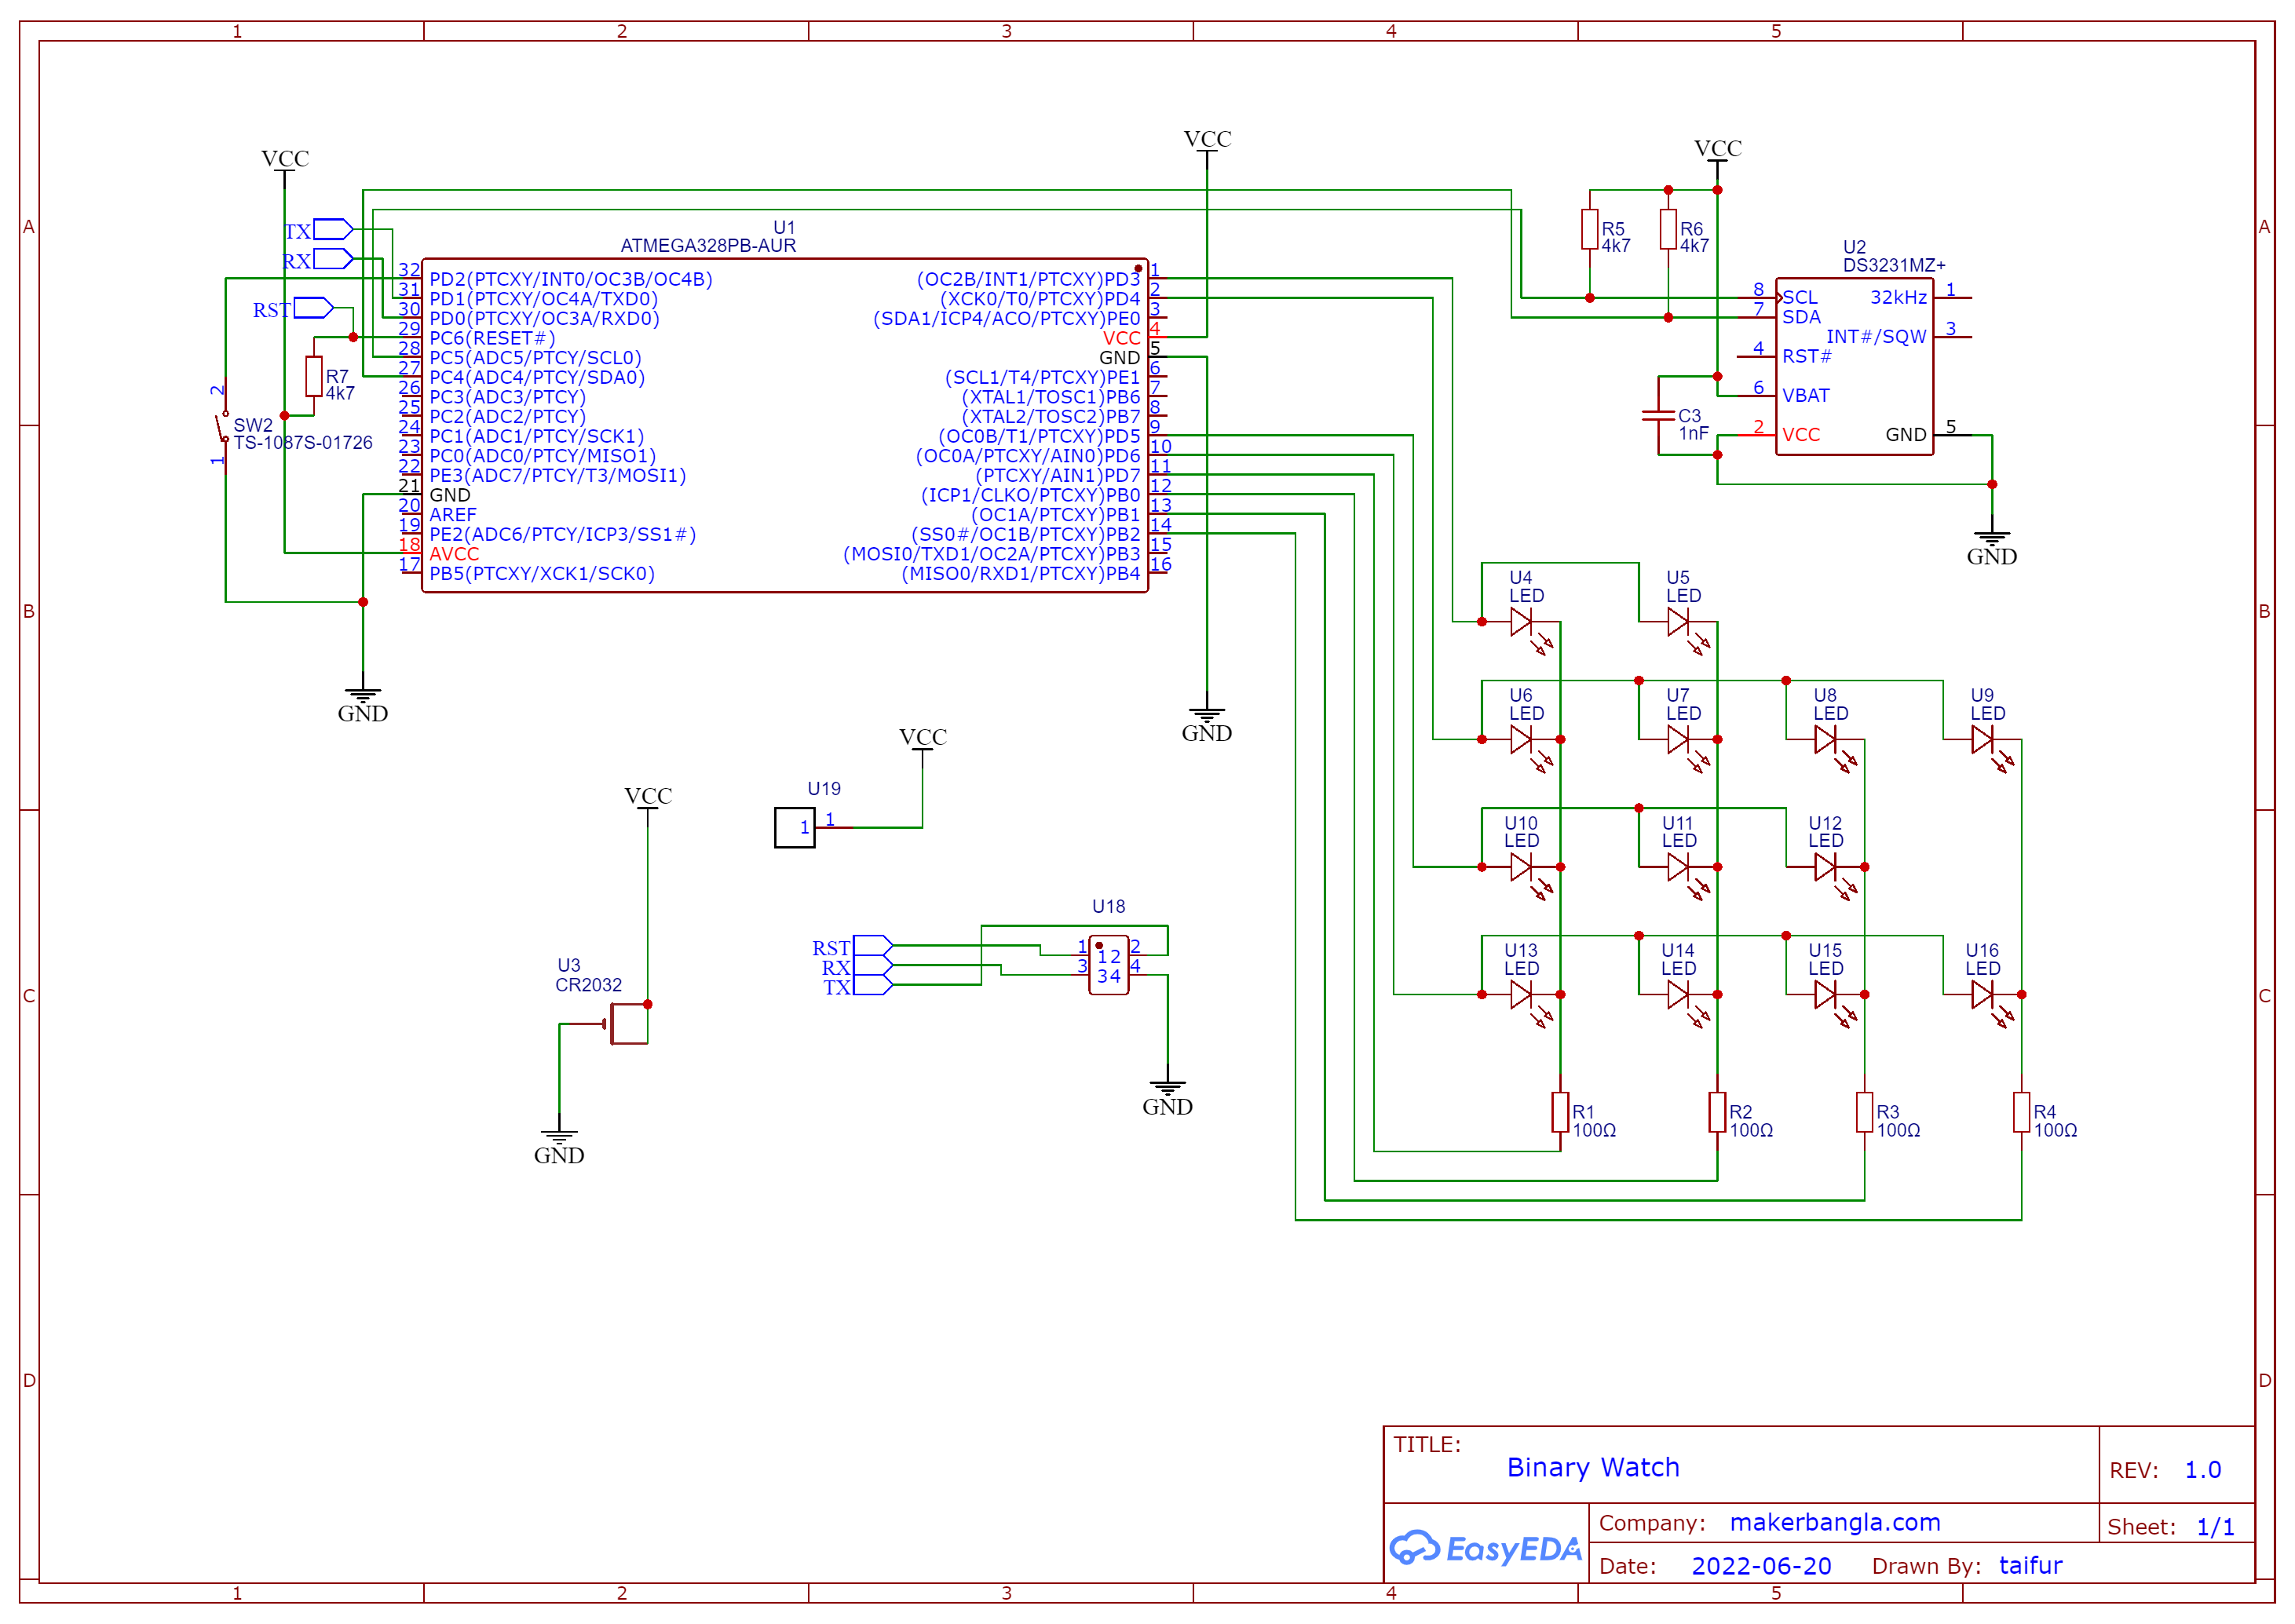 Schematic_PCB Binary Watch Battery v4_2023-01-21.png